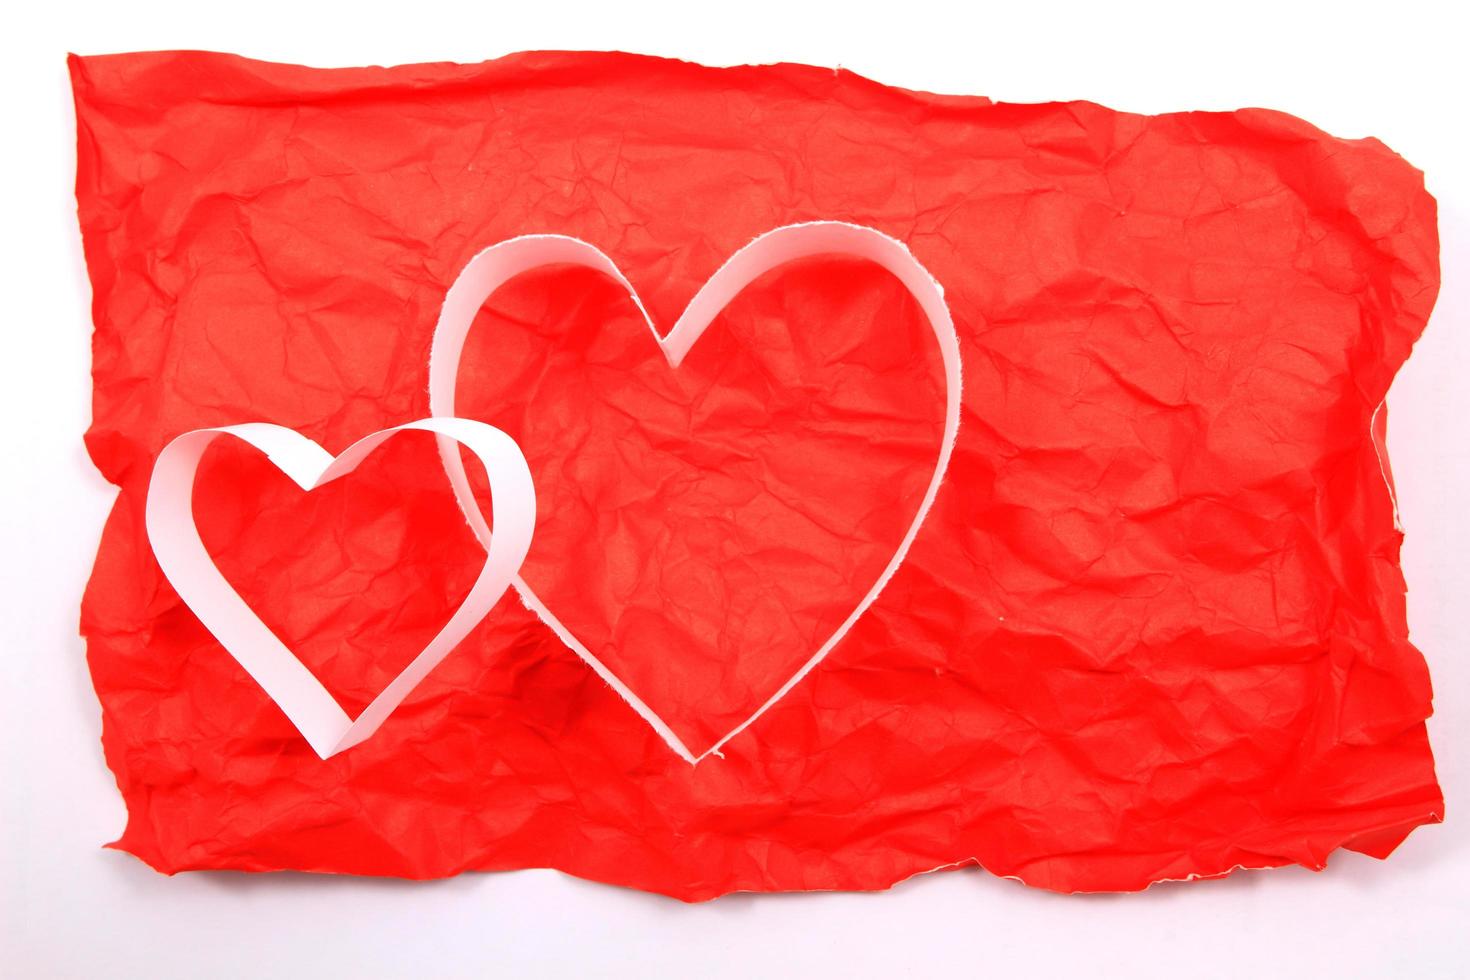 Paper hearts on red background photo